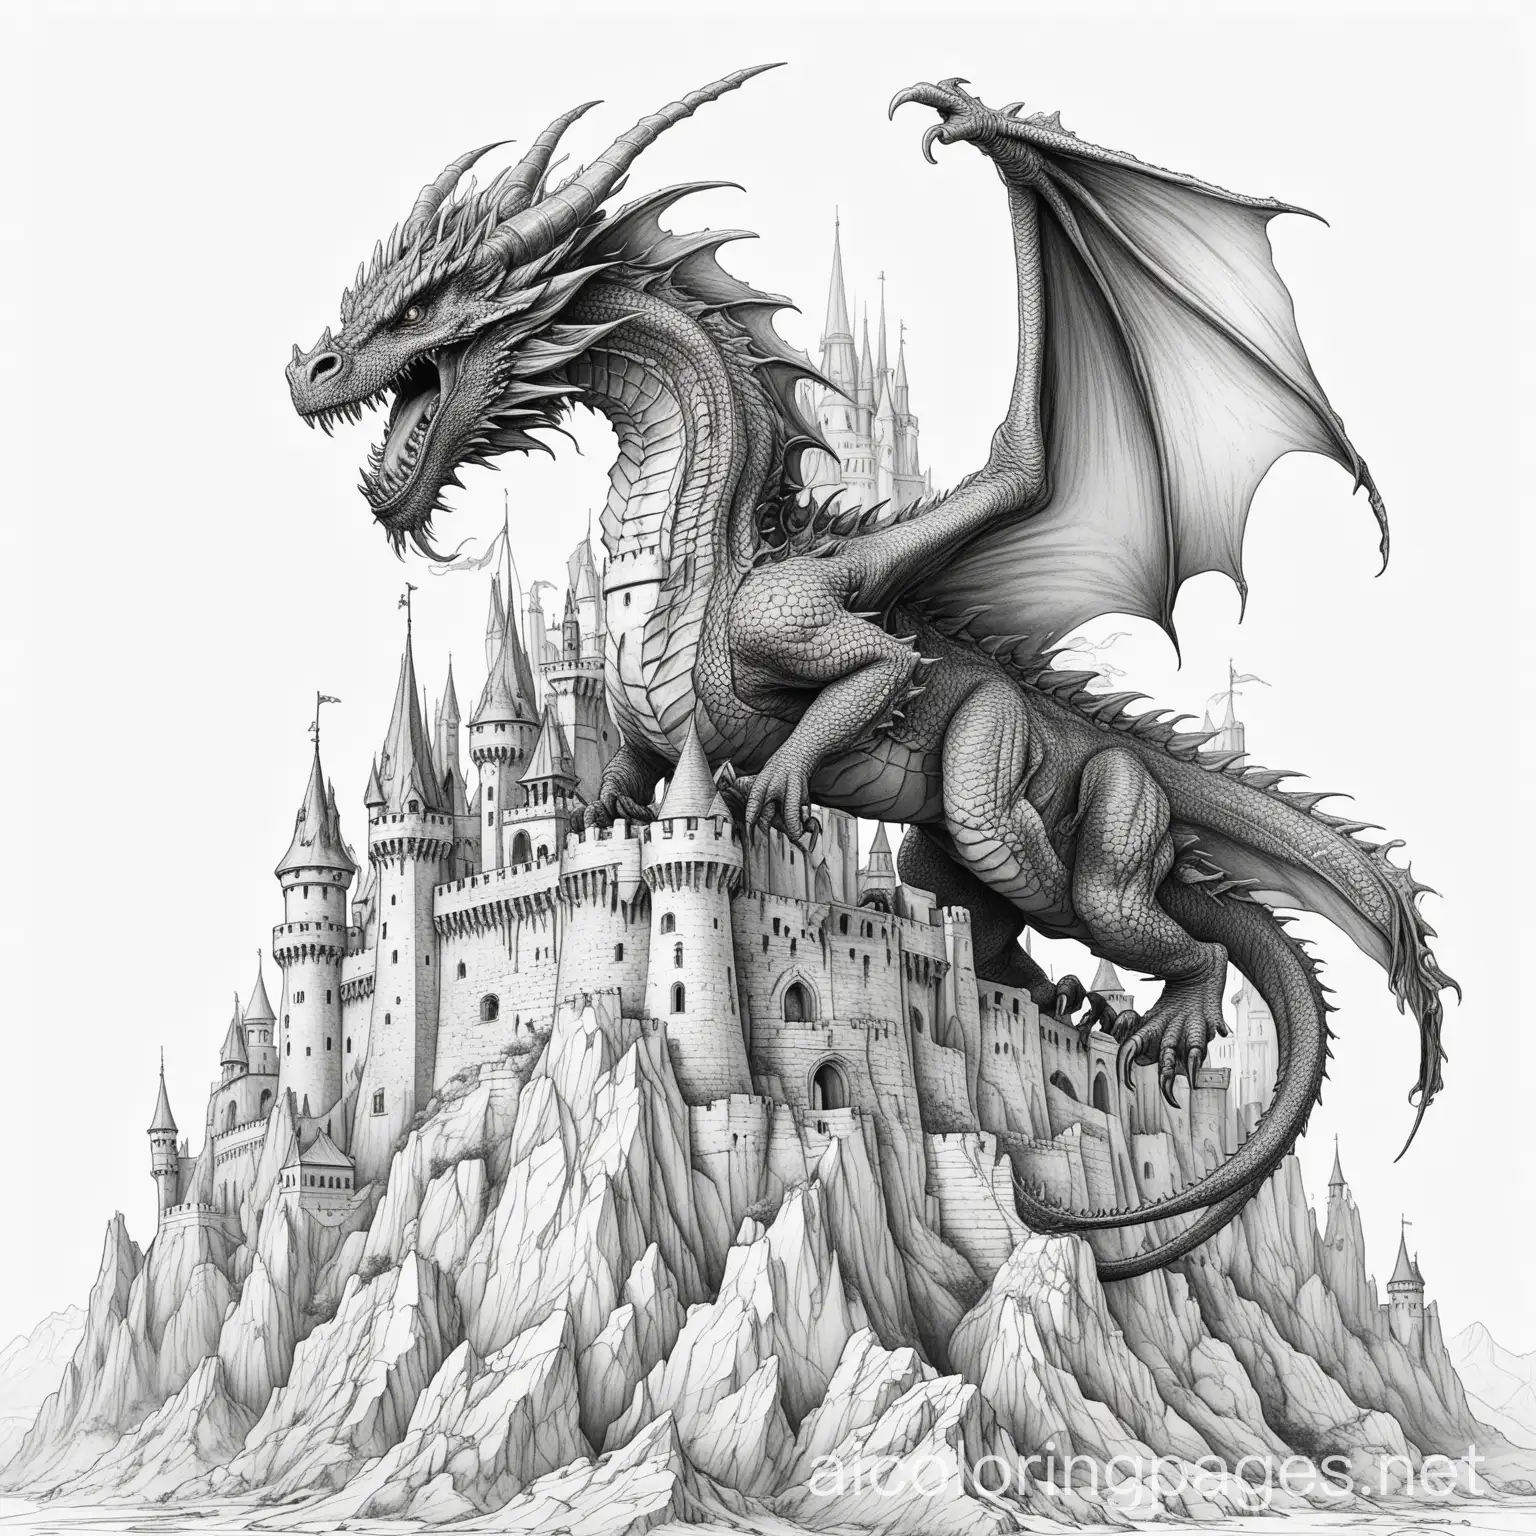 A fierce dragon with a castle., Coloring Page, black and white, line art, white background, Simplicity, Ample White Space.